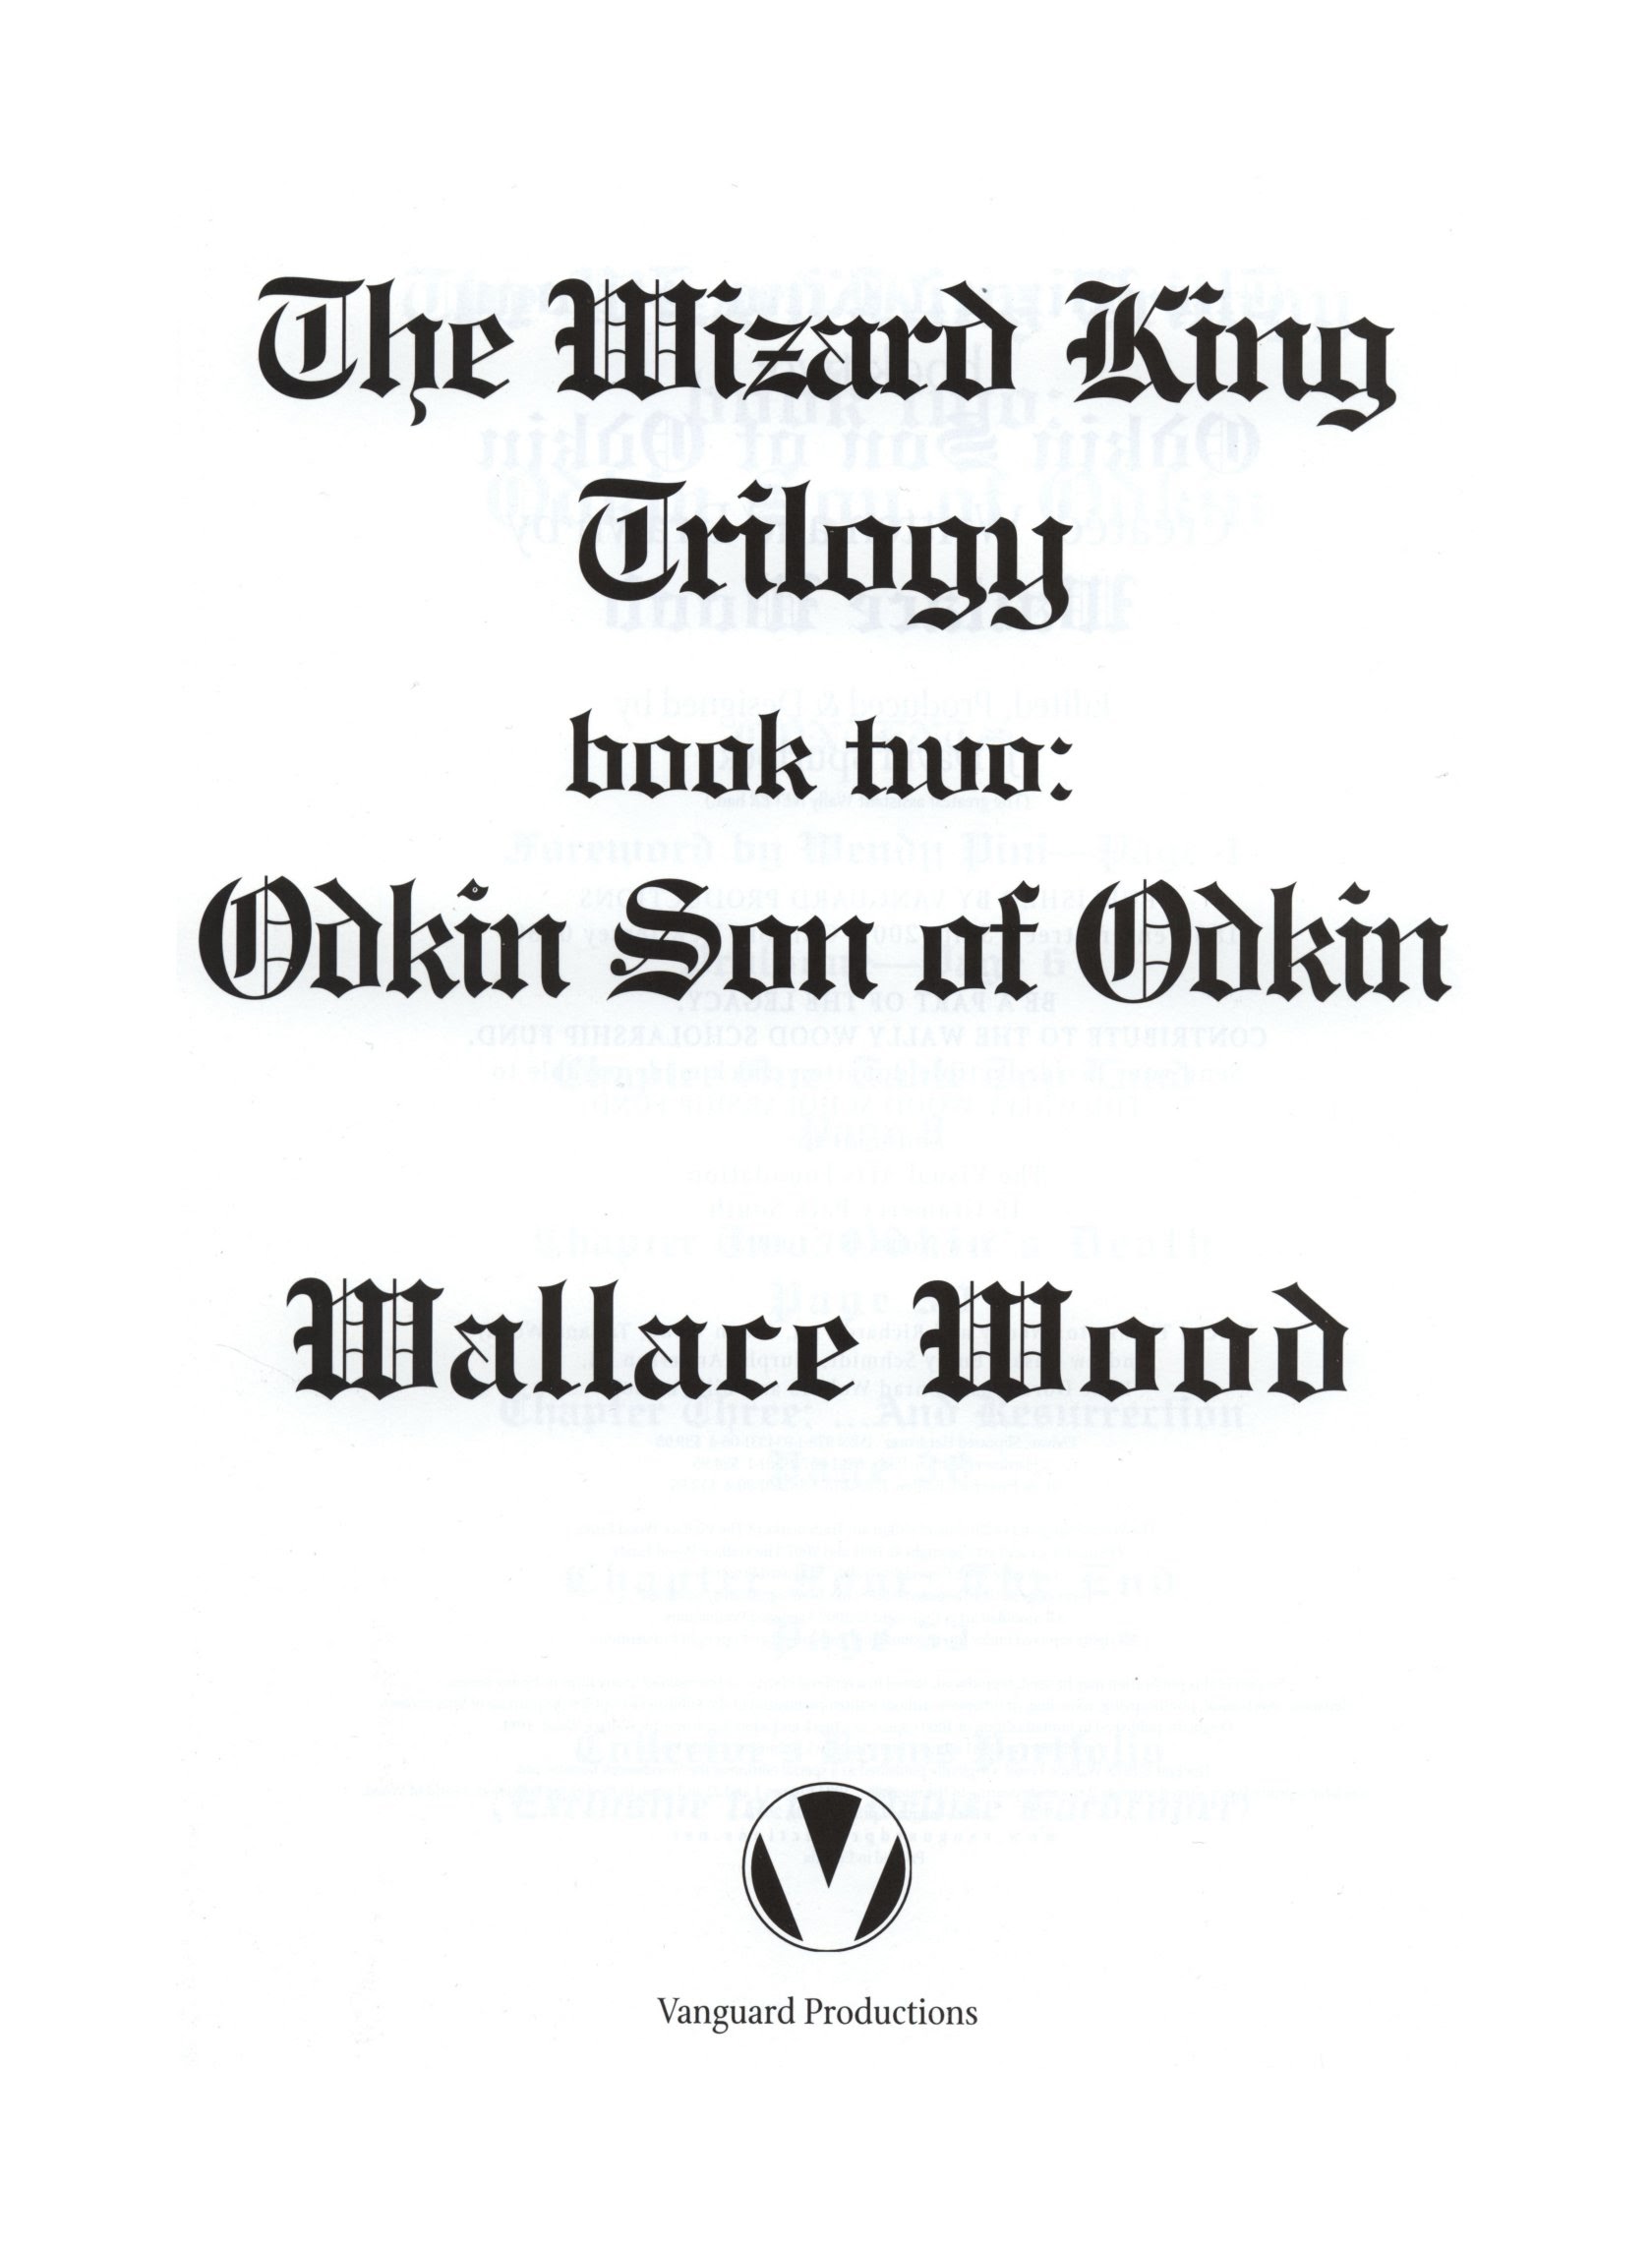 Read online The Wizard King Trilogy comic -  Issue # Full - 3